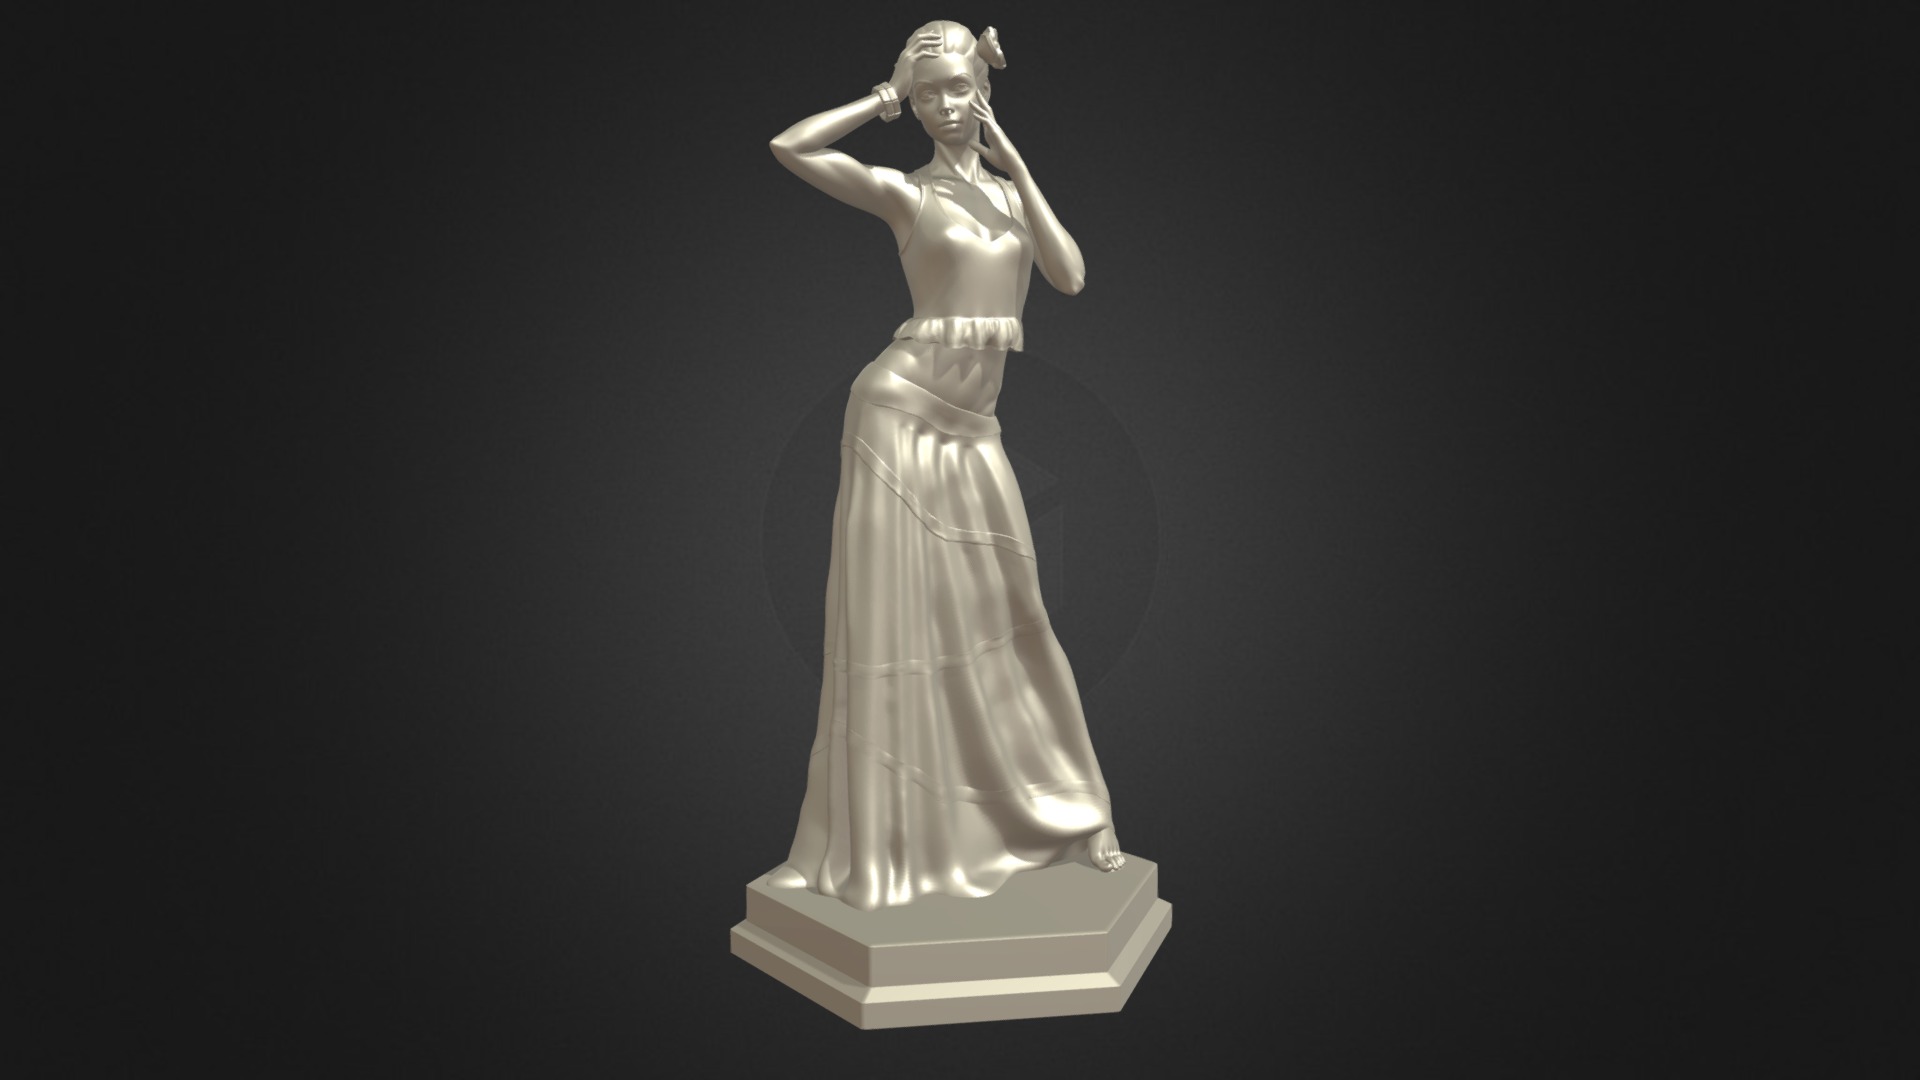 3D model 3D Printable Dancer - This is a 3D model of the 3D Printable Dancer. The 3D model is about a statue of a person.